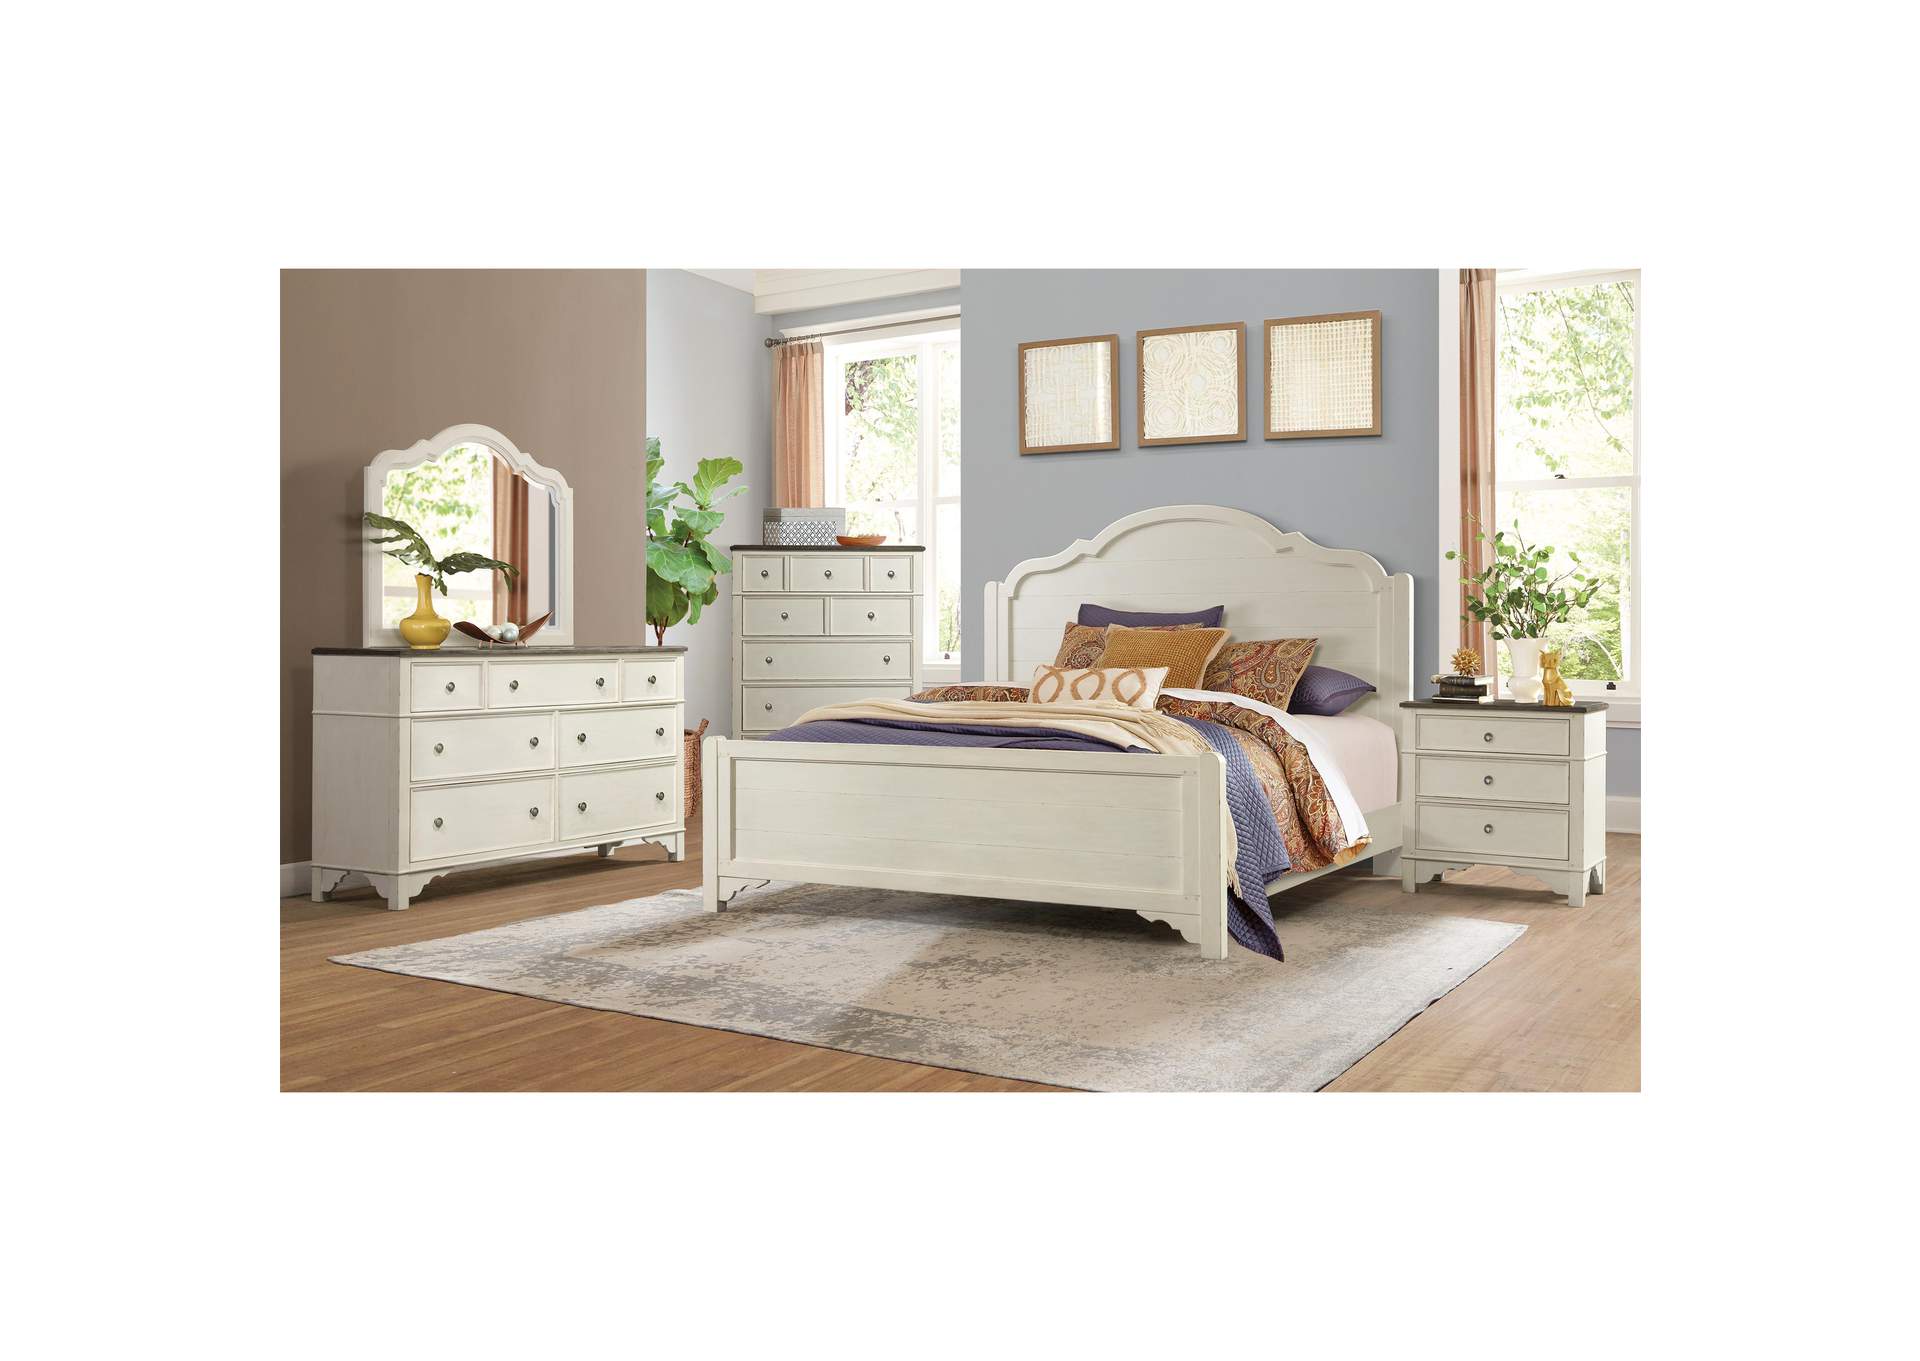 Grand Haven Feathered White Panel California King Bed w/ Dresser, Mirror,Riverside